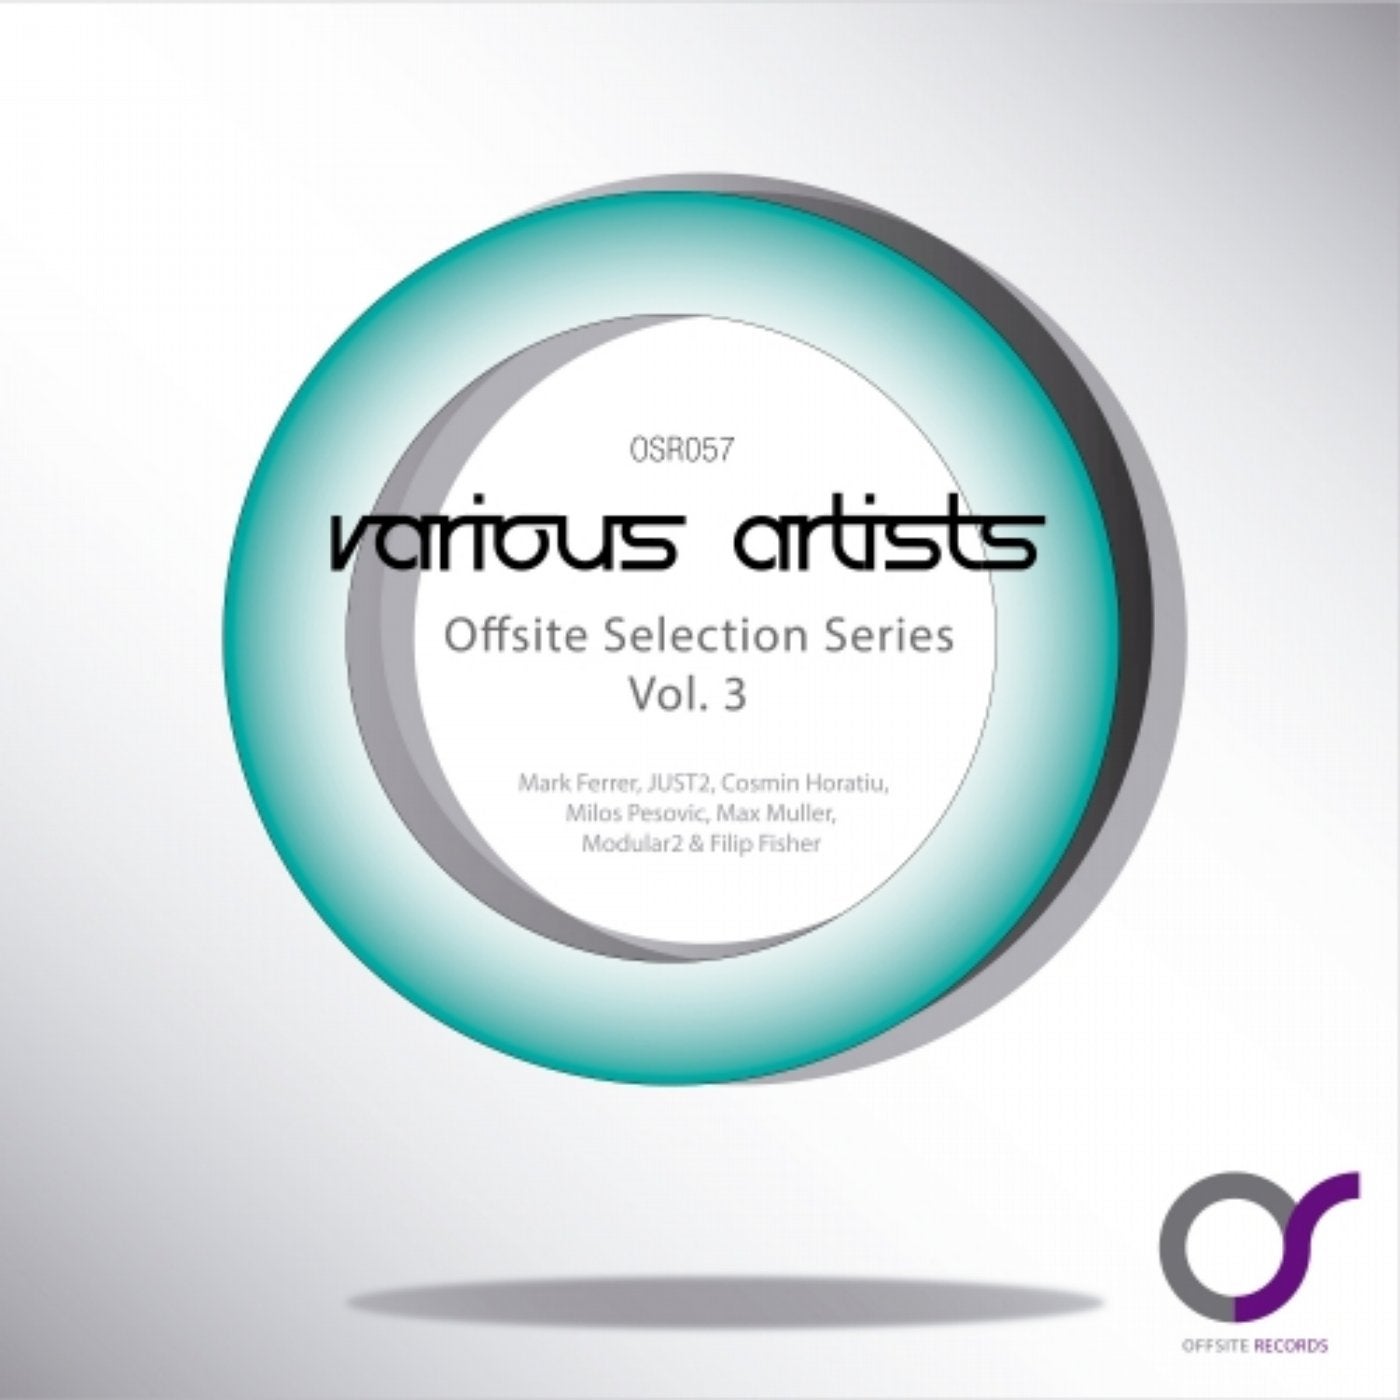 Offsite Selection Series, Vol. 3